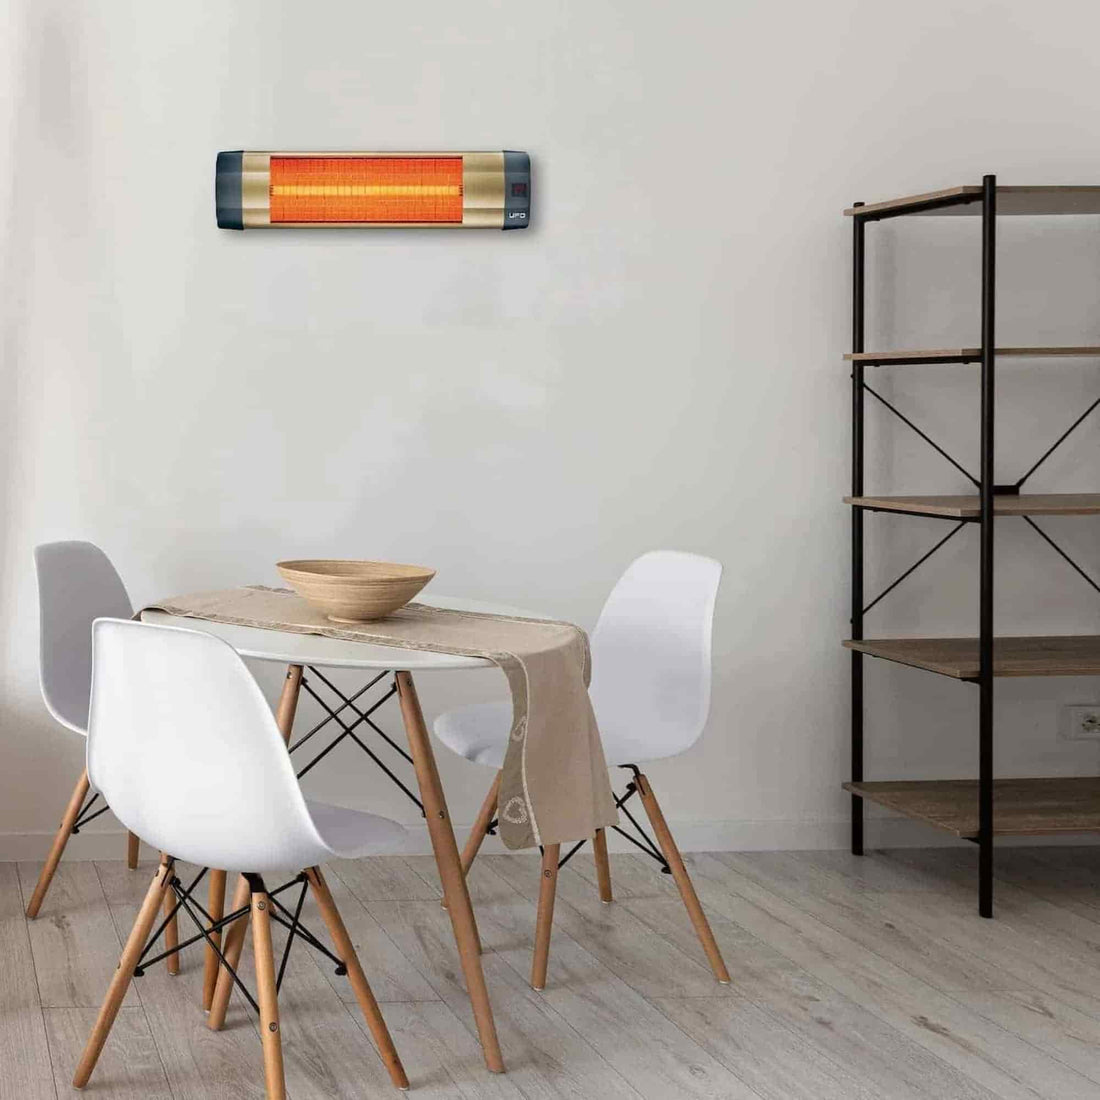 How to Maintain Infrared Heater Safely for a Long Time Use?